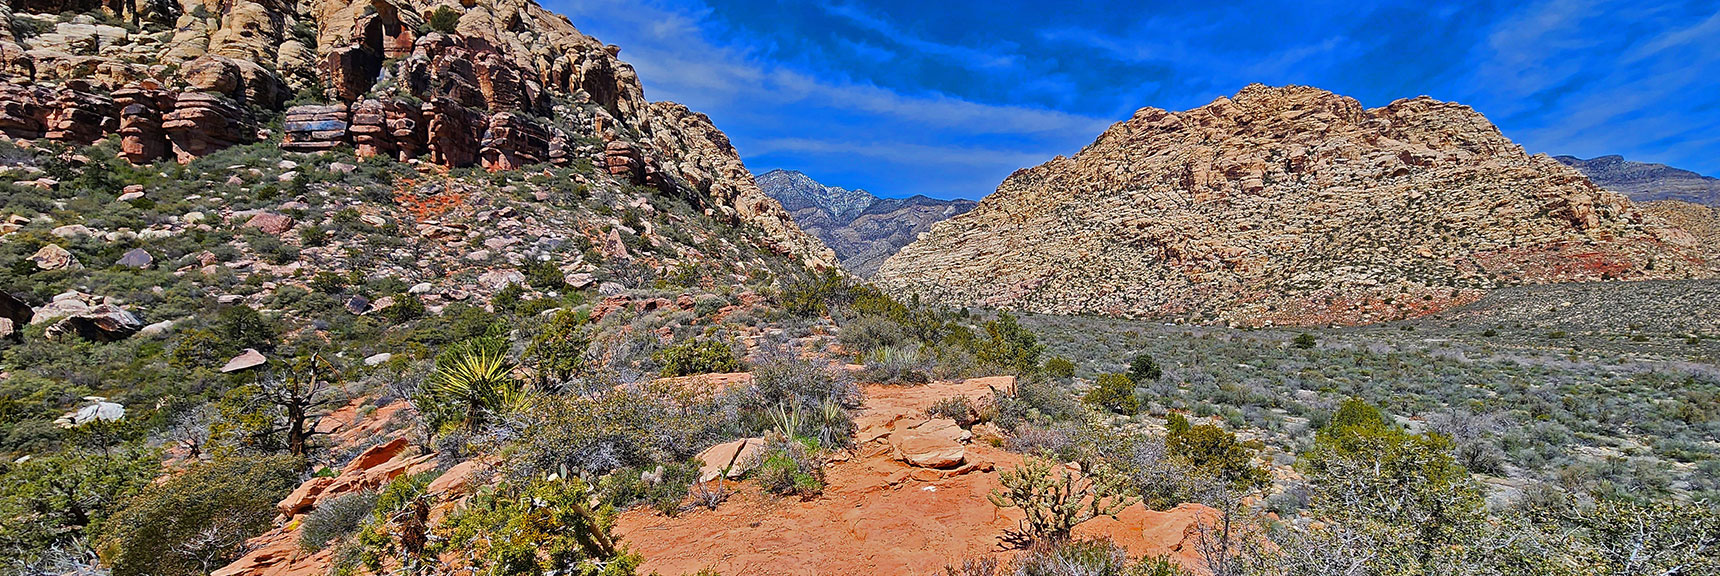 Northern High Point Would Be a Rewarding Brief Hike from Willow Spring | SMYC Trail | Red Rock Canyon National Conservation Area, Nevada | David Smith | LasVegasAreaTrails.com